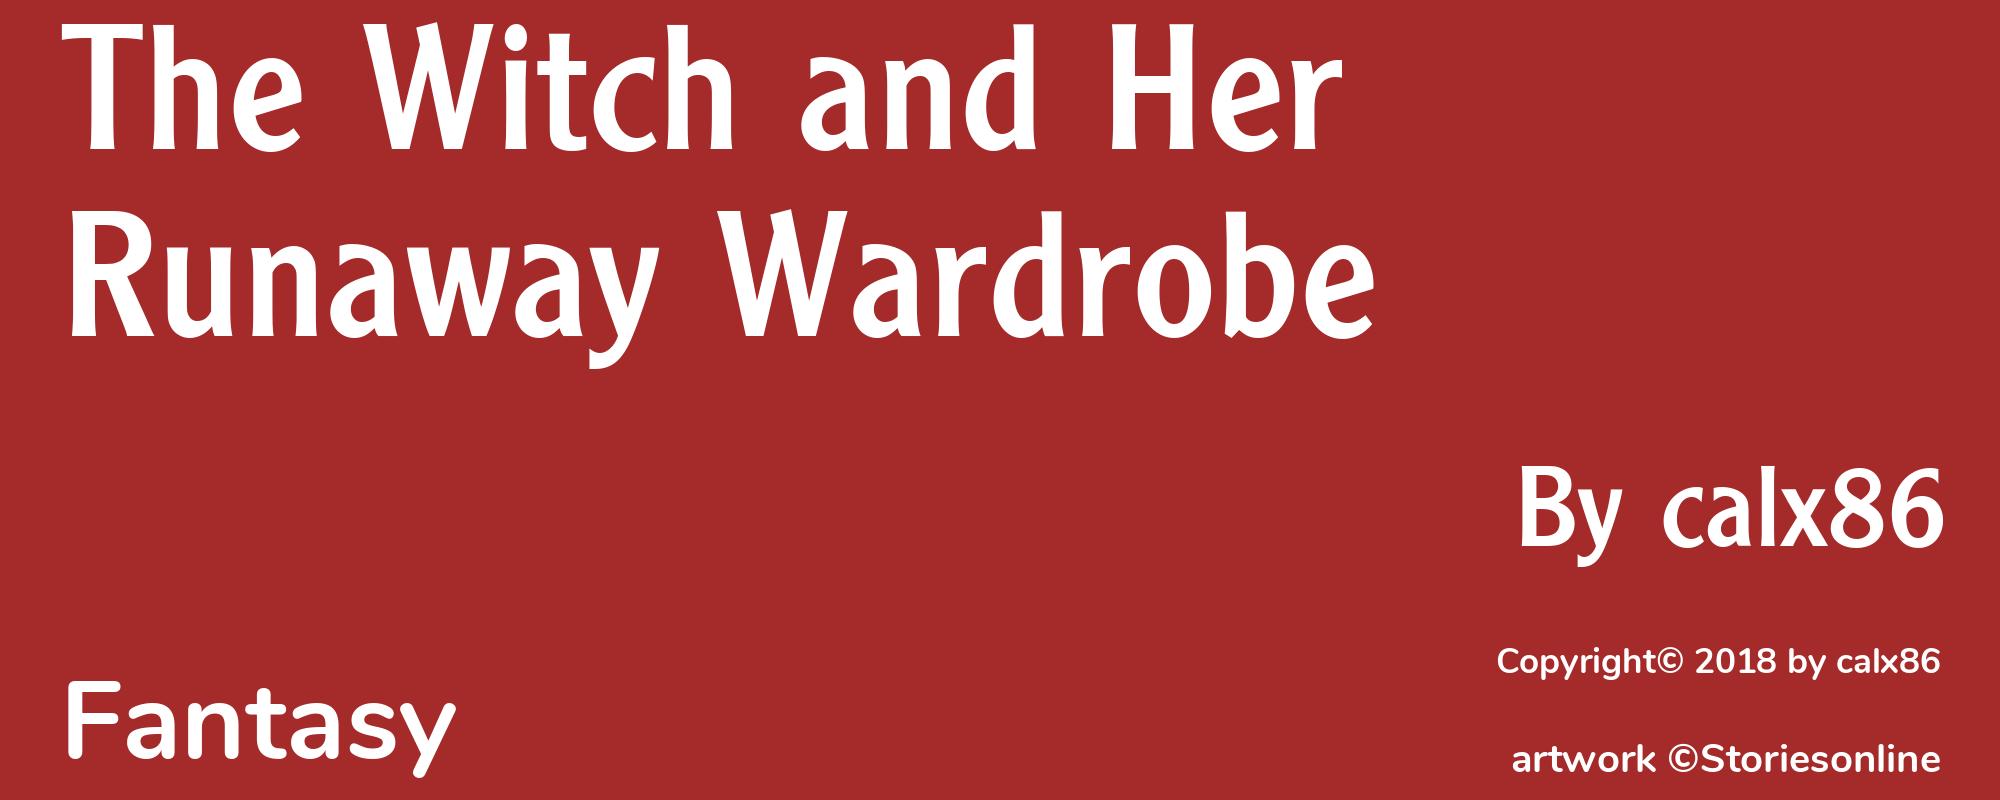 The Witch and Her Runaway Wardrobe - Cover